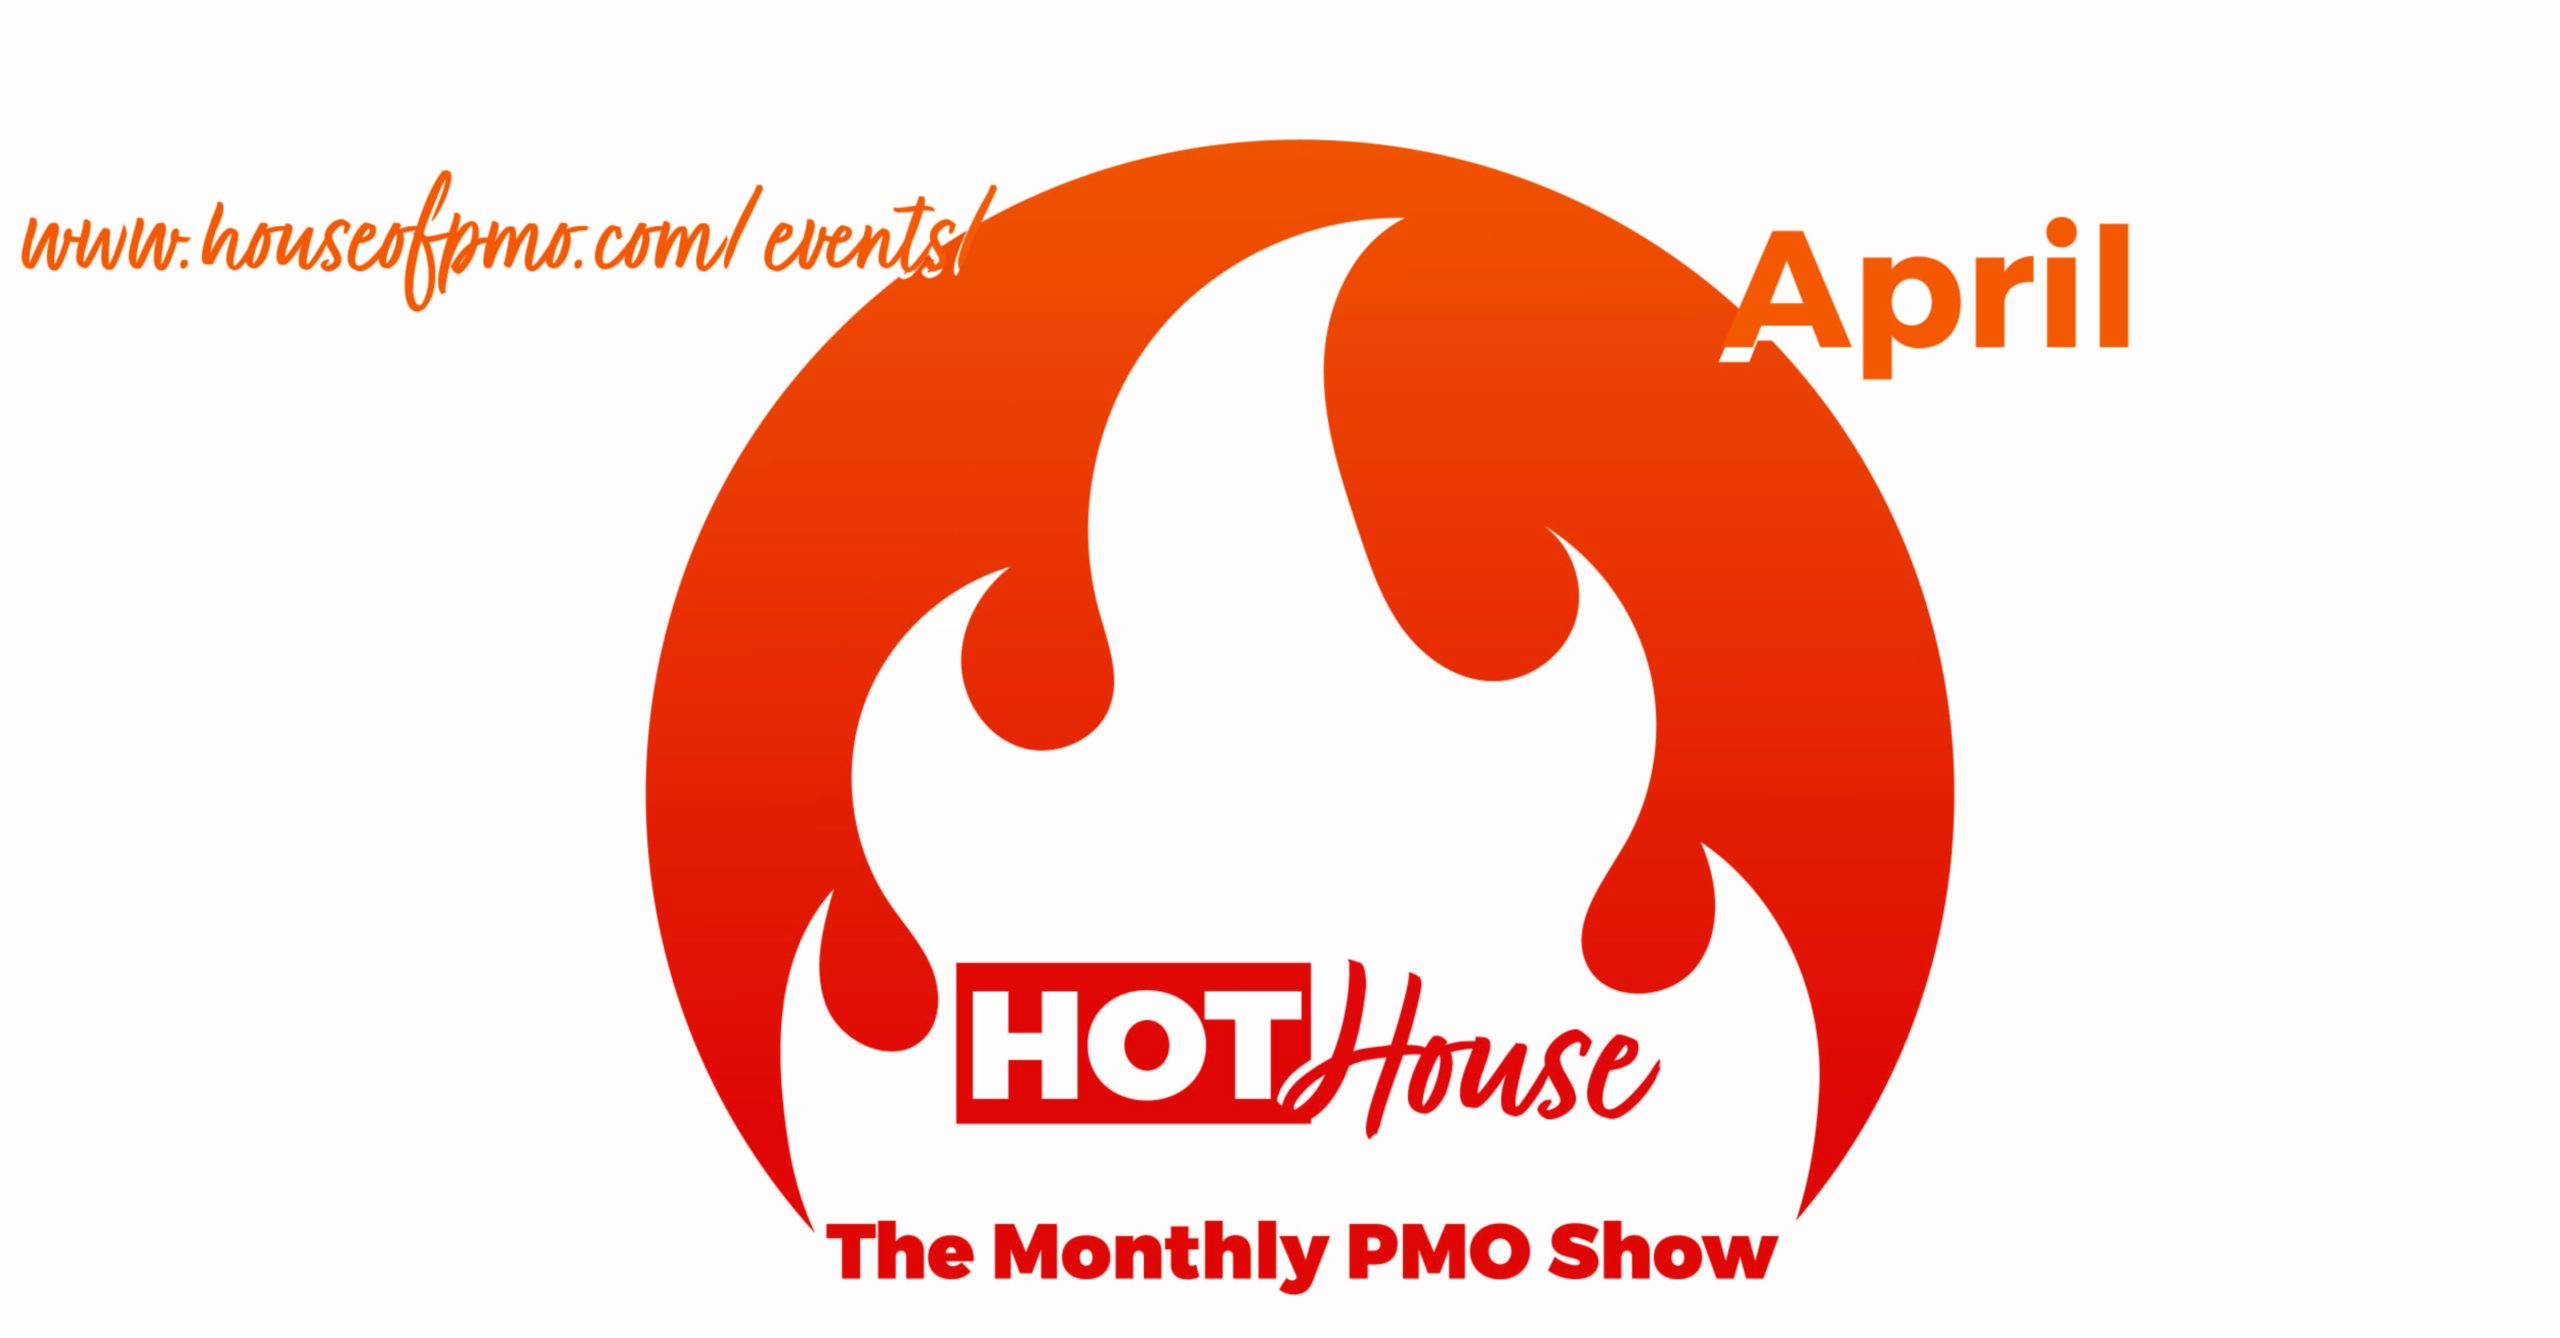 event image for PMO hot house april